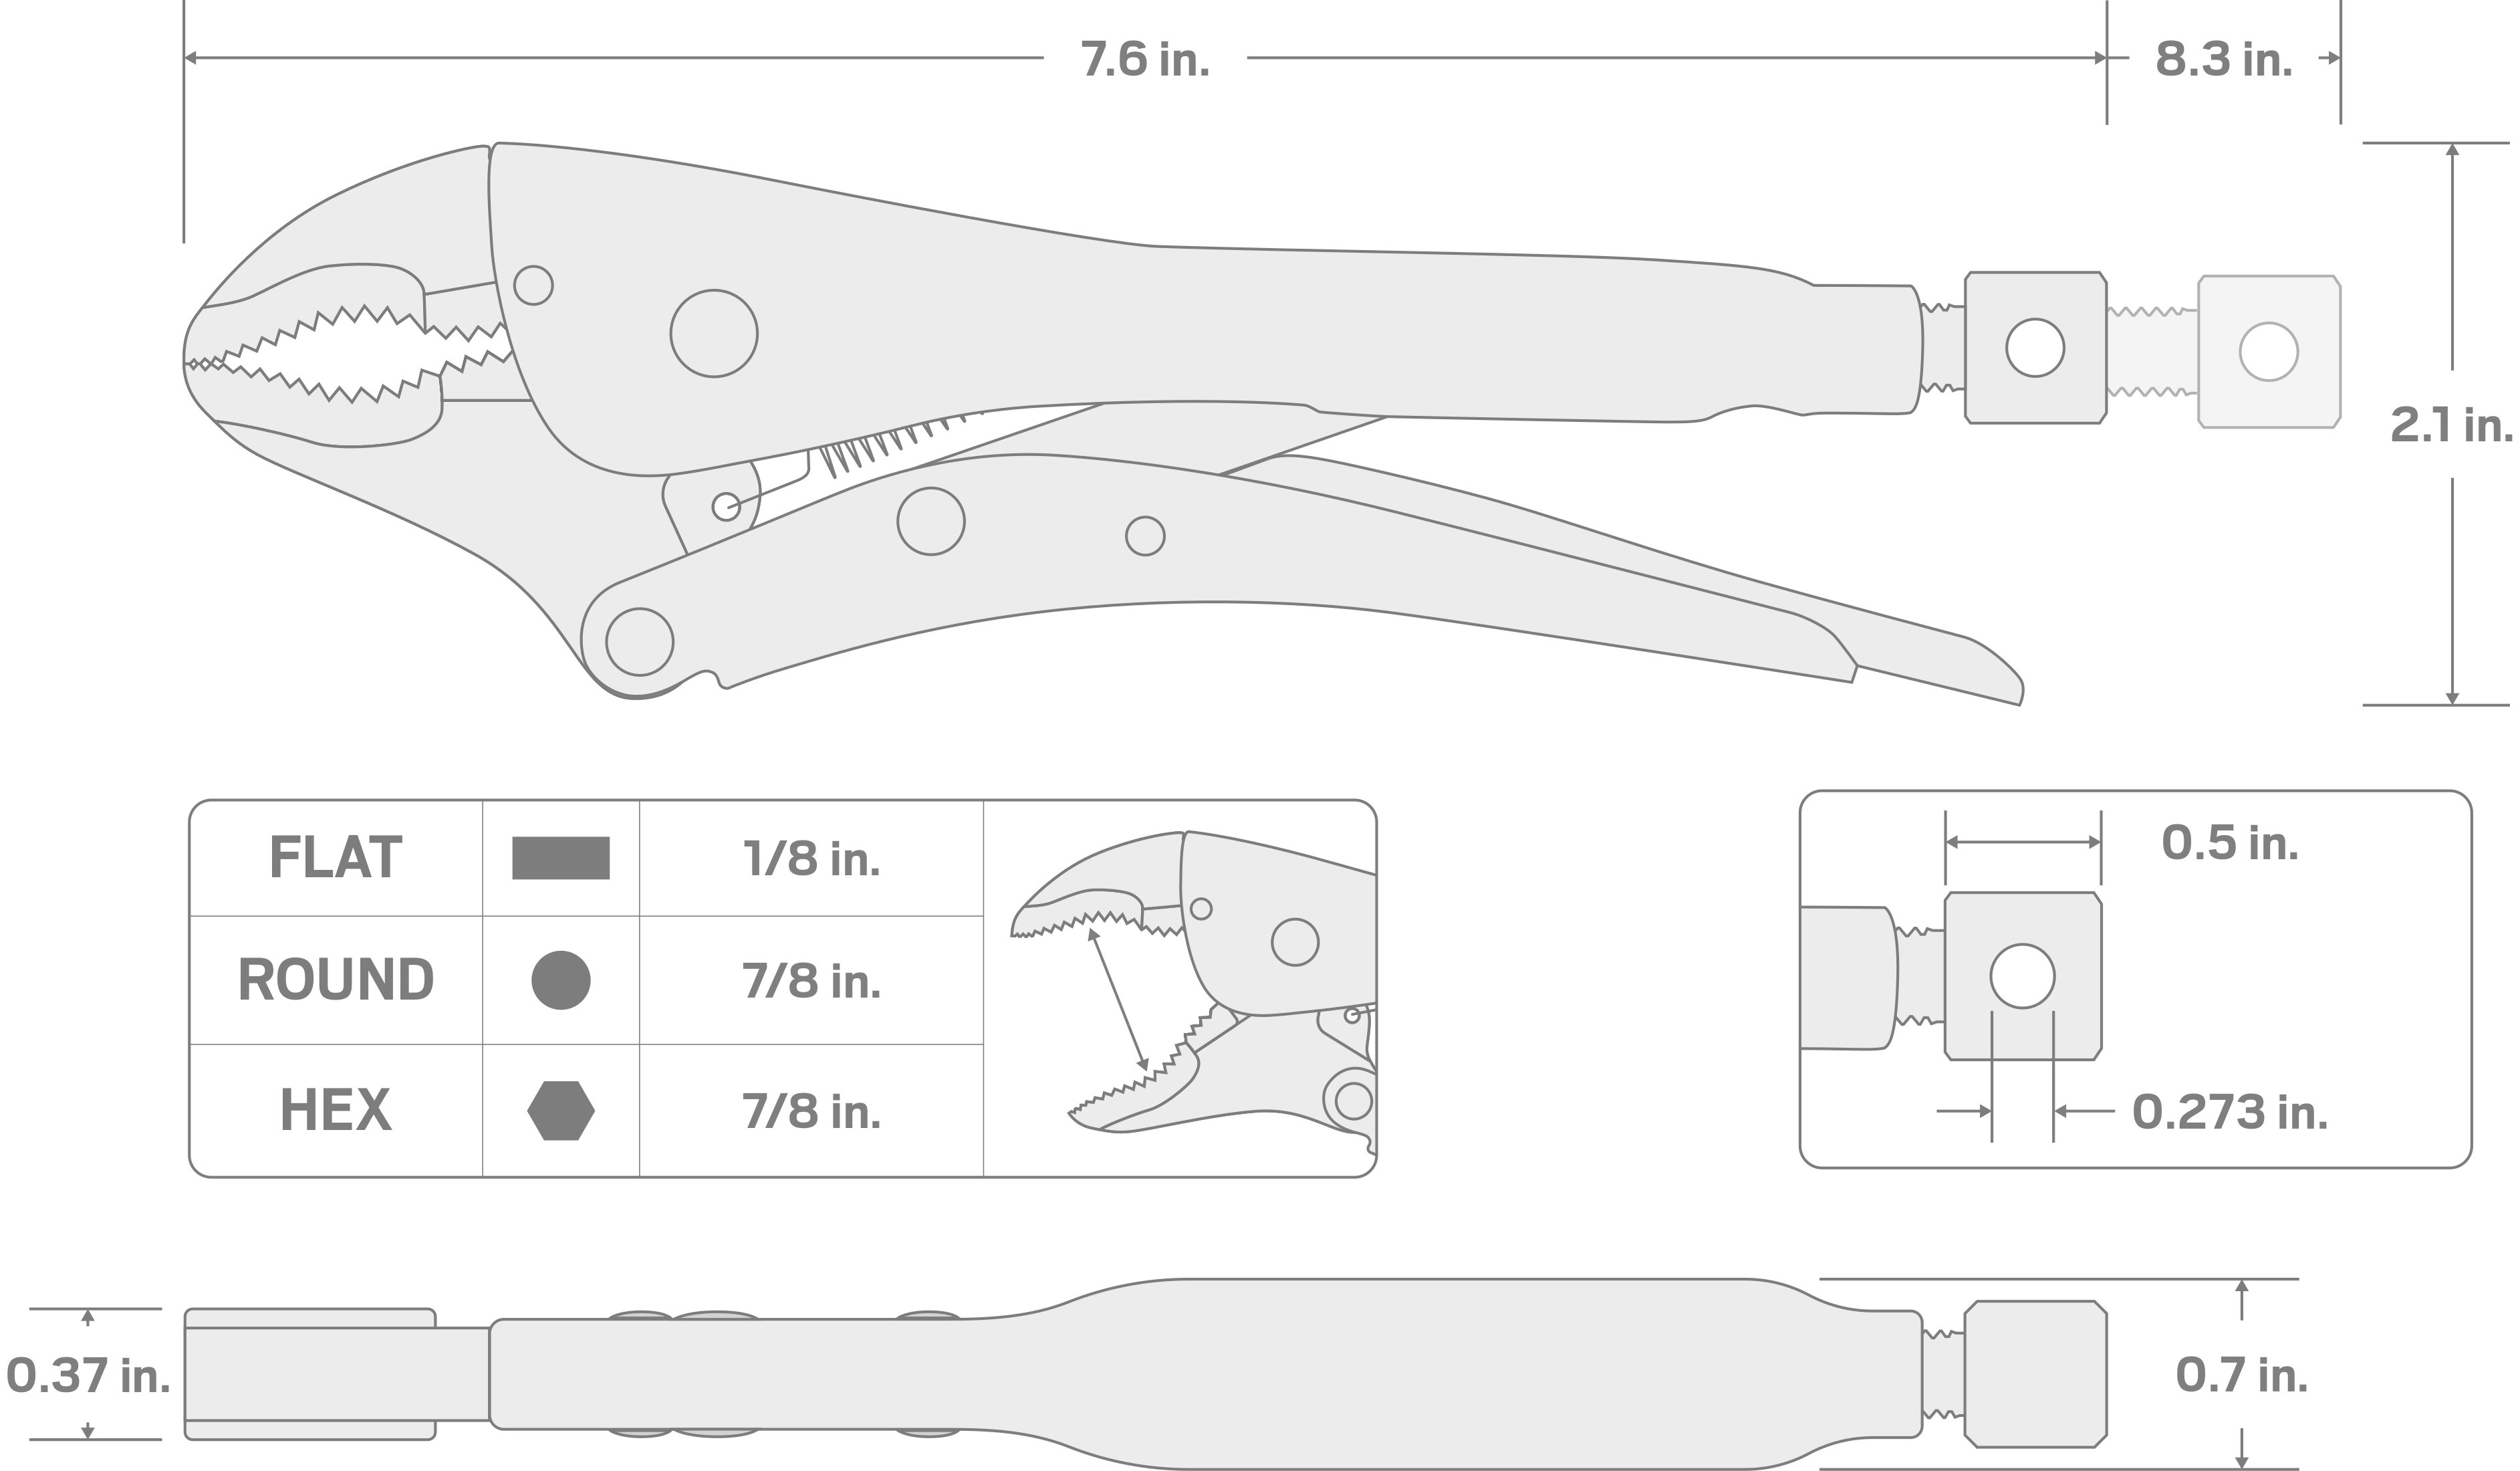 Specs for 7 Inch Curved Jaw Locking Pliers